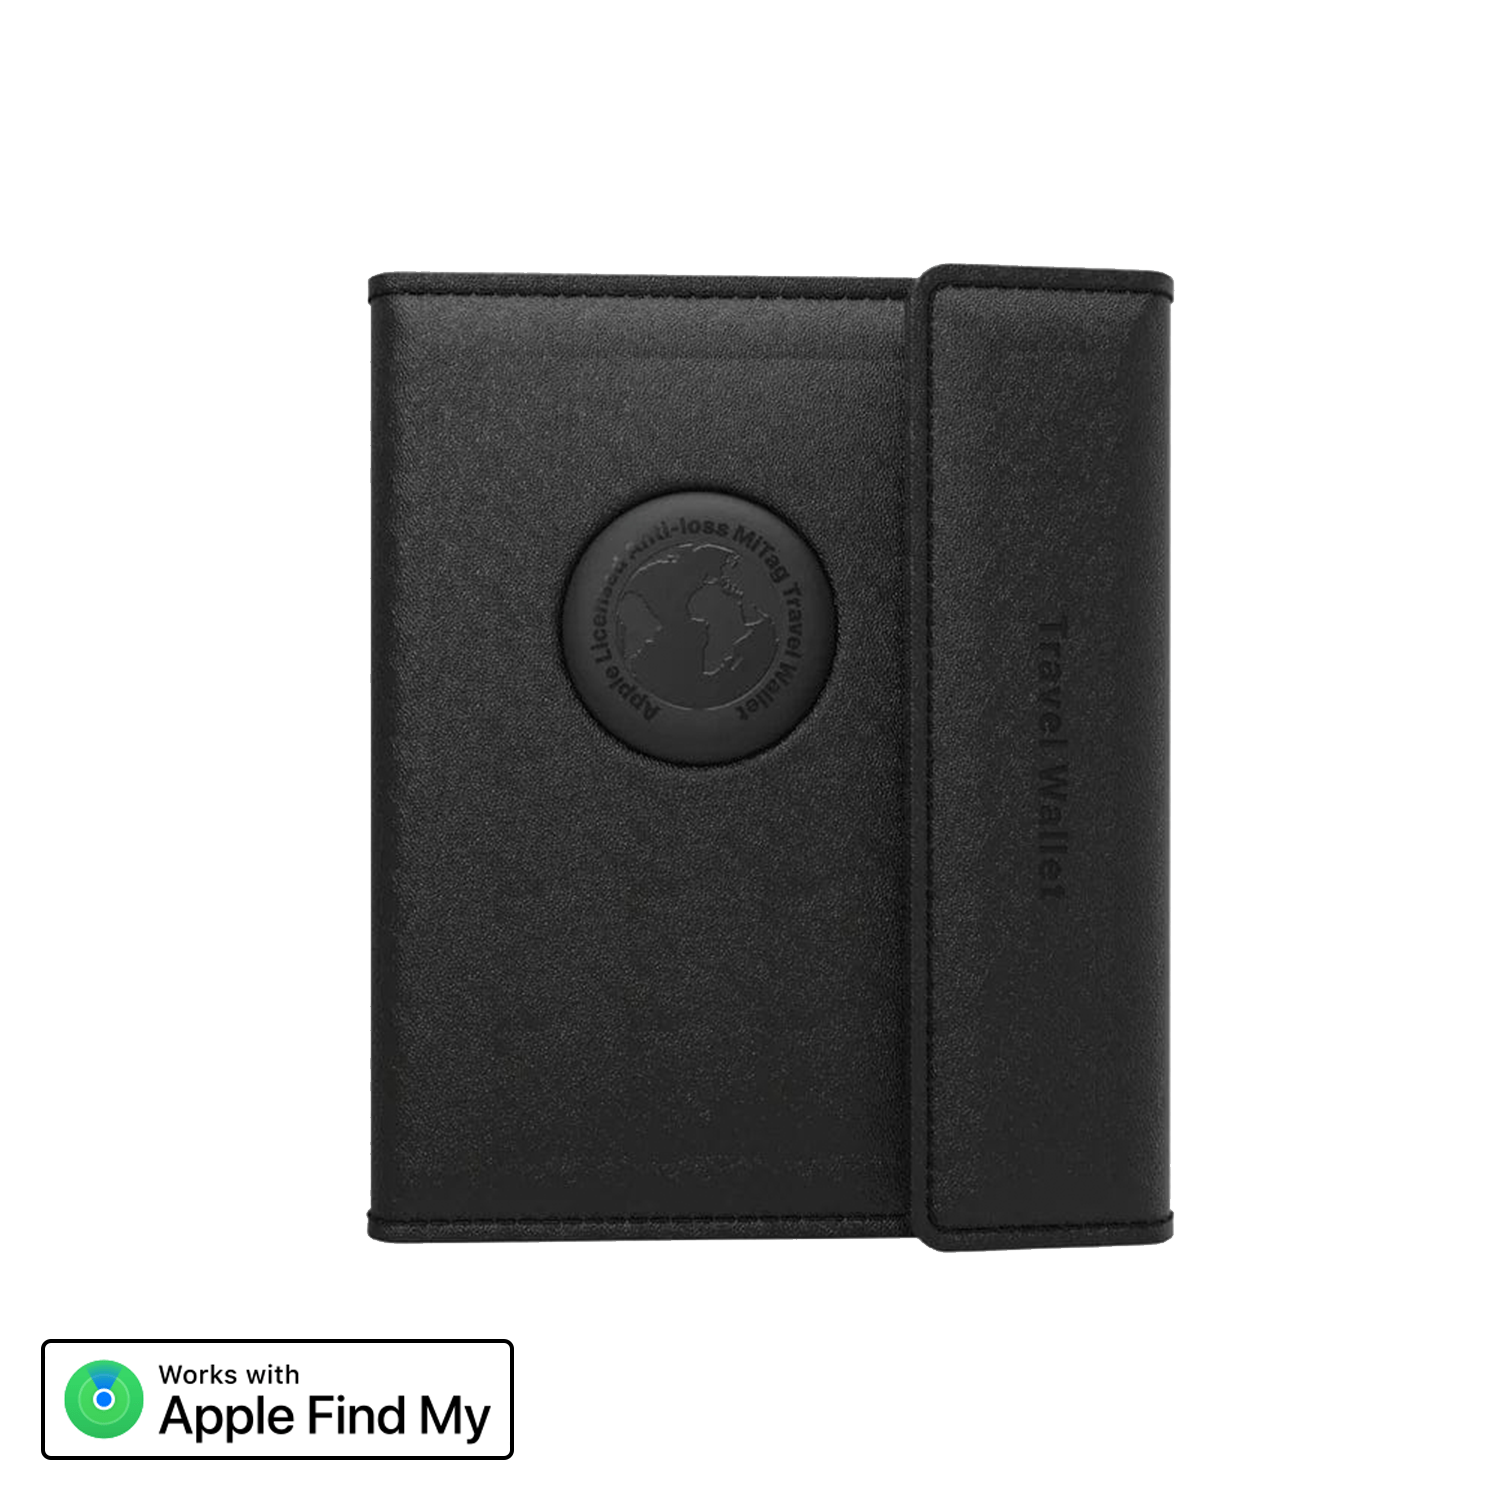 MiLi MiBook Apple MFi Certified MiTag Travel Passport Wallet | Premium Leather Passport Holder with Integrated Bluetooth Tracker Compartment (iOS)